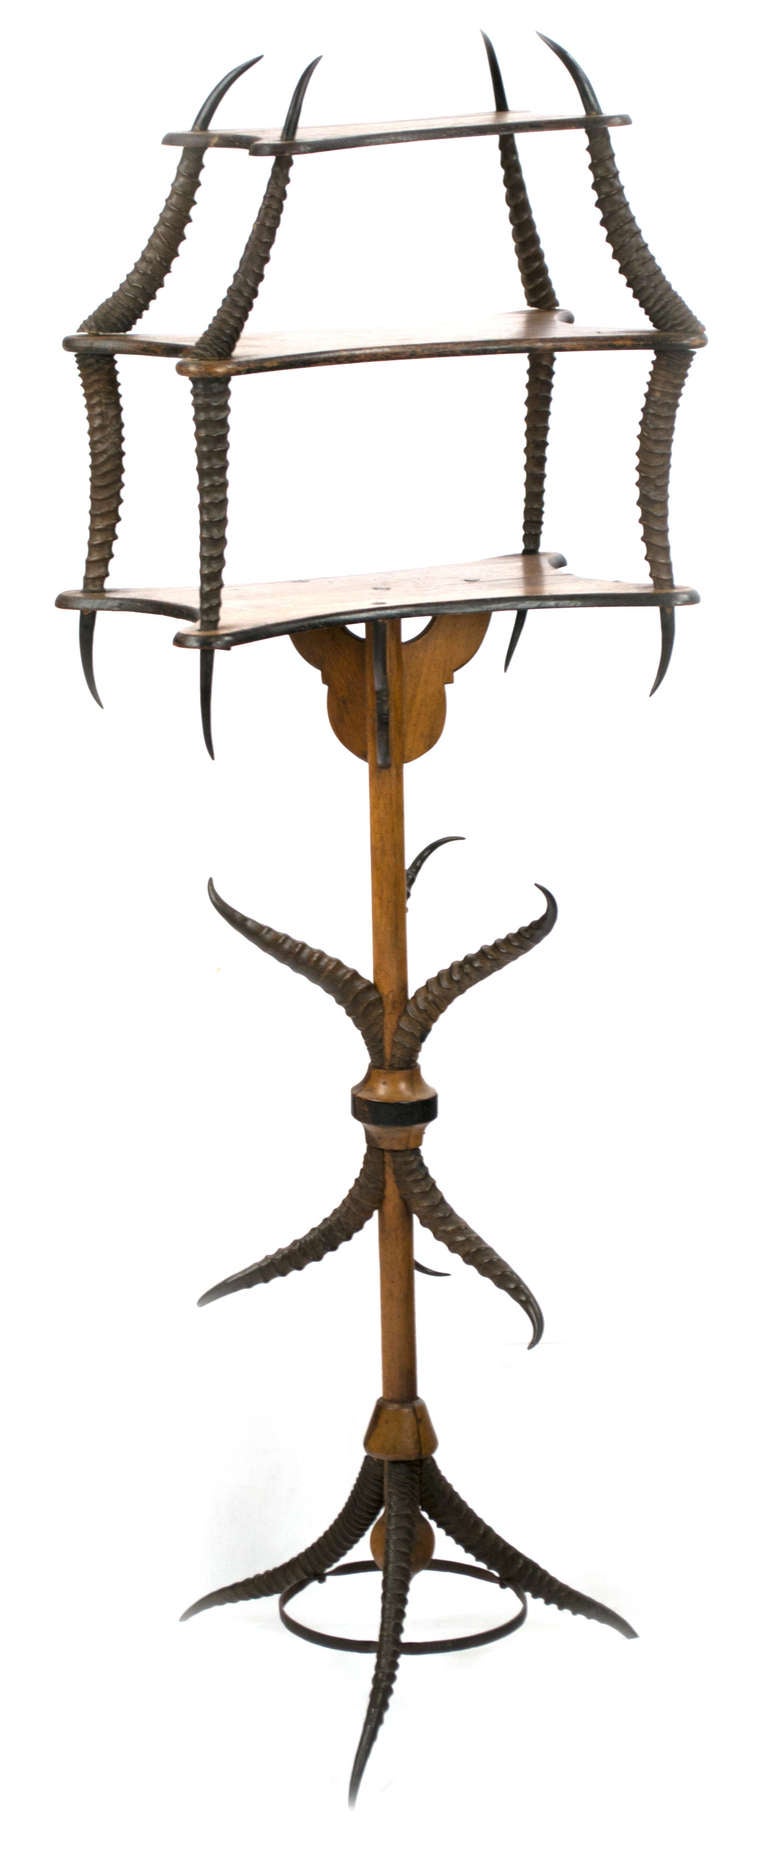 This remarkable stand with shelves, purchased in Lyon, France, uses Gazelle horns as the feet and shelf supports.